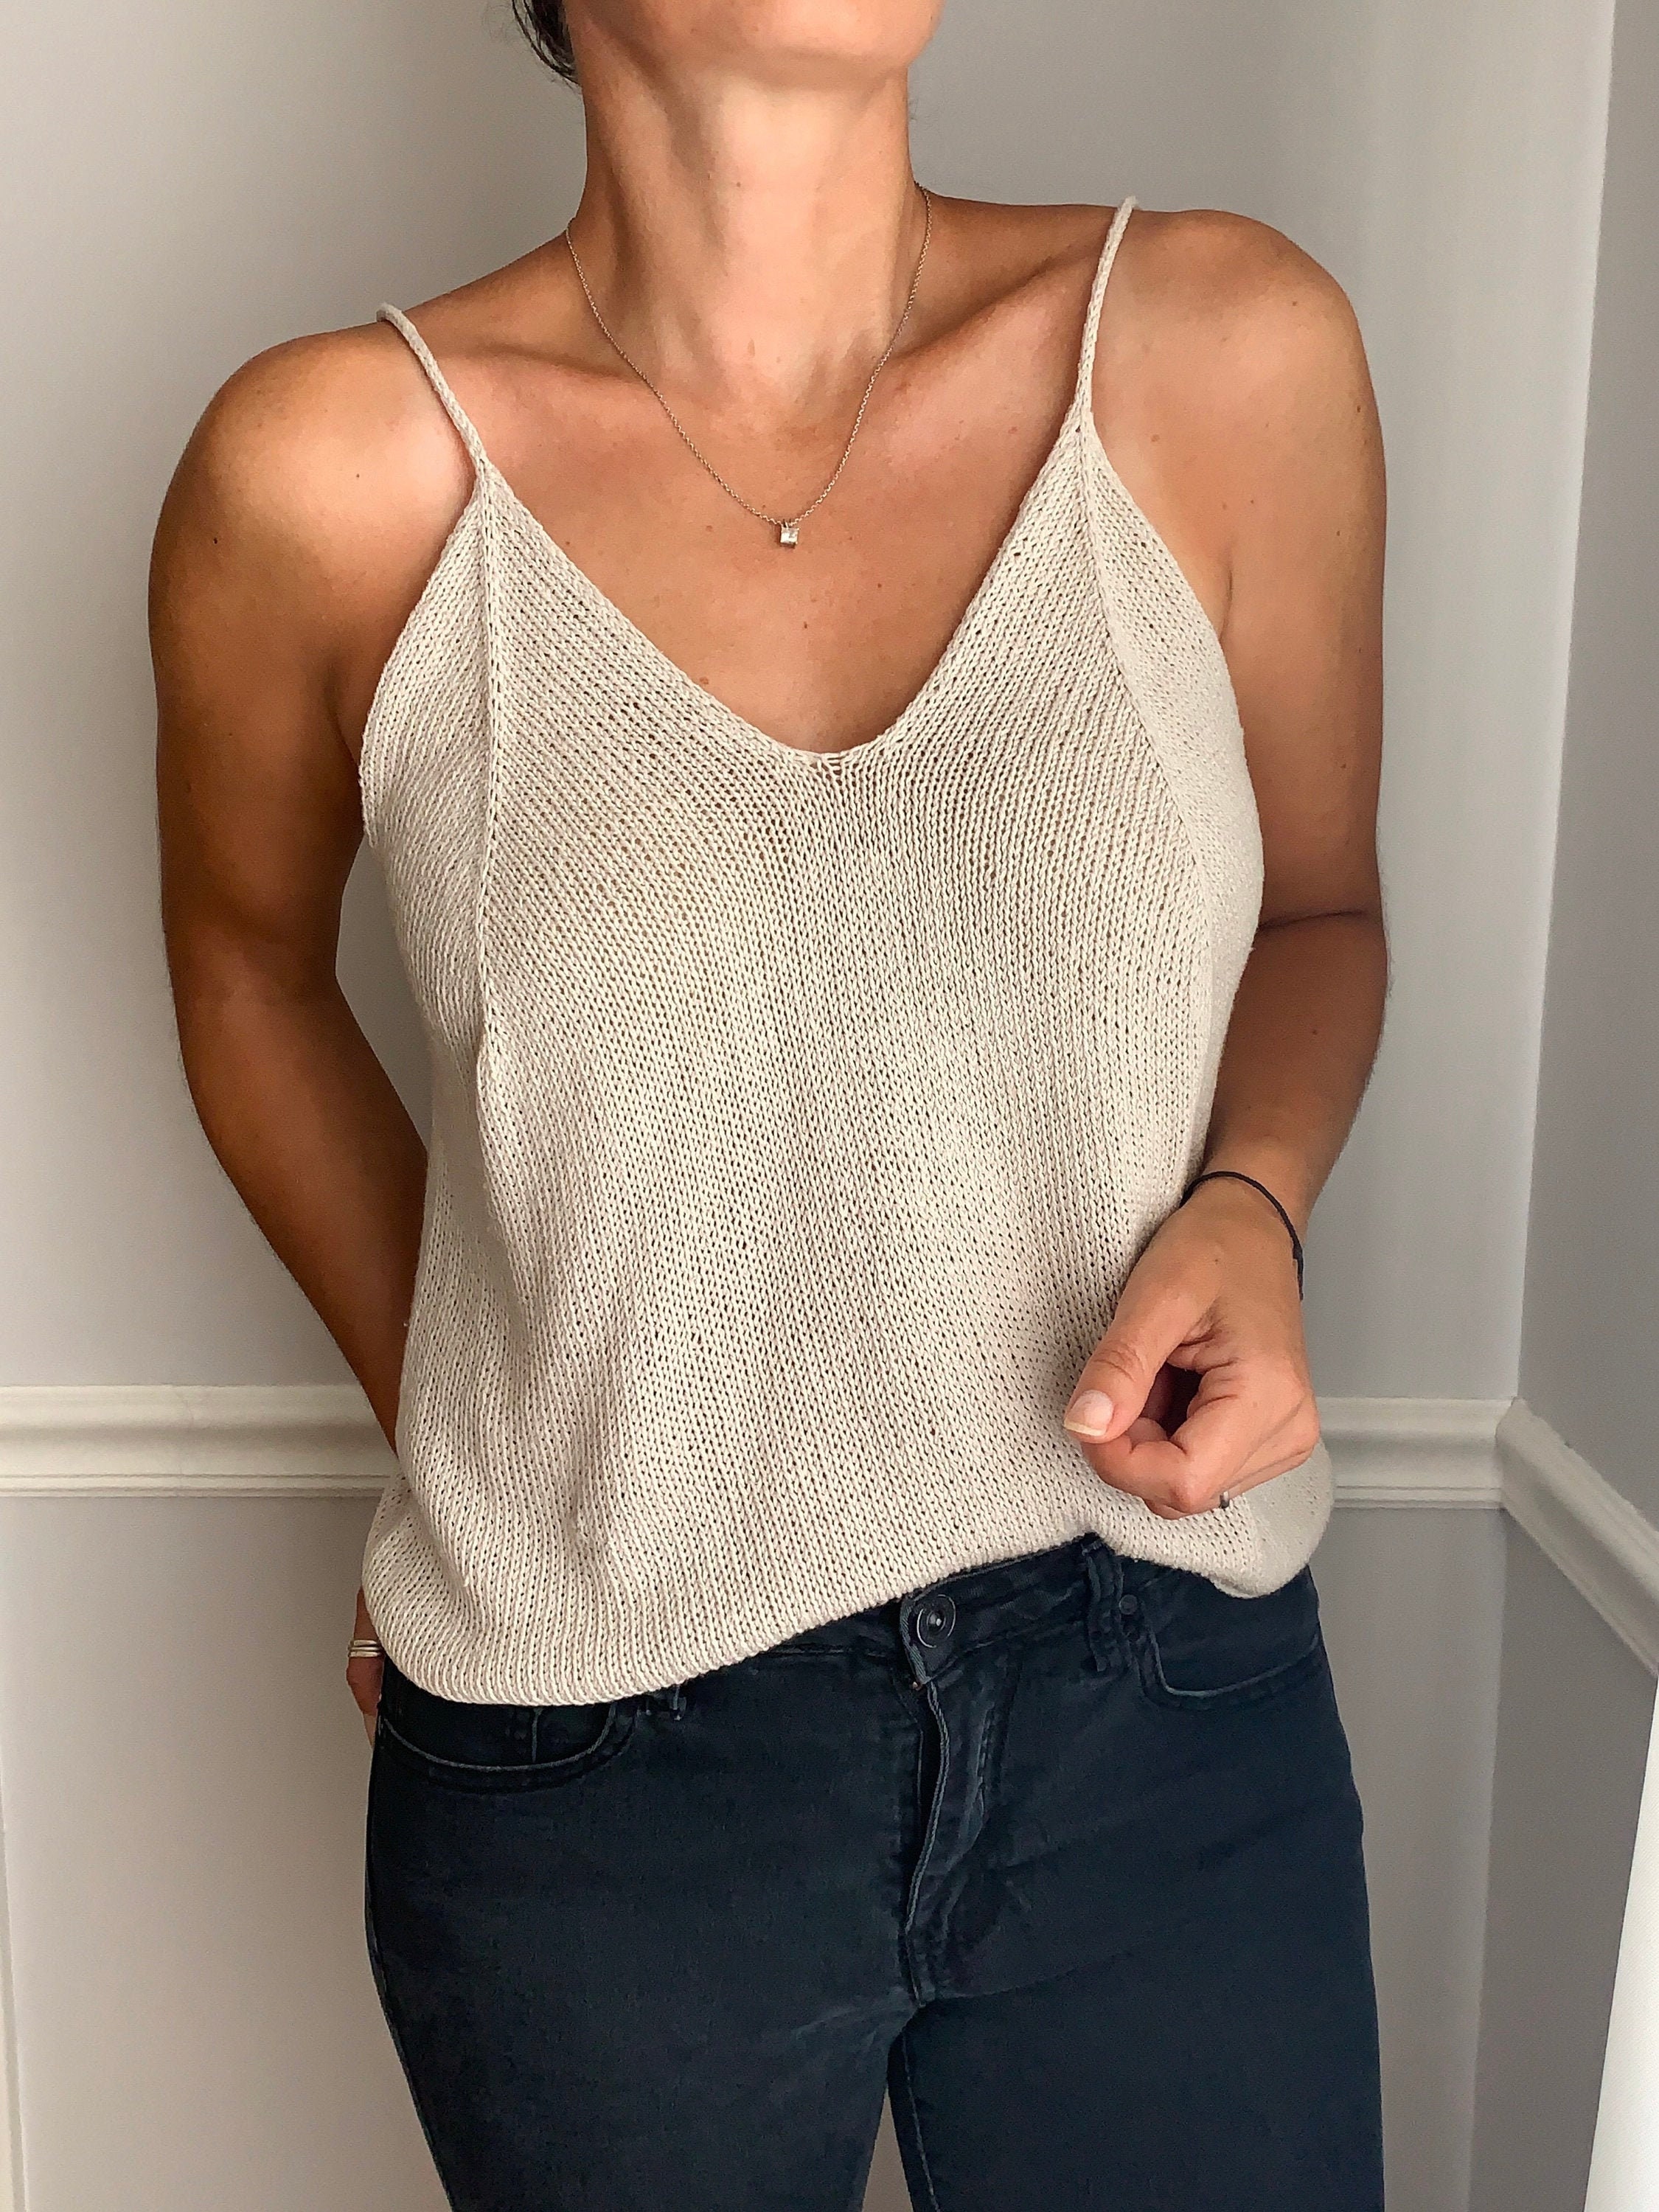 Camisole No. 5 - Knitting Pattern in English – • MY FAVOURITE